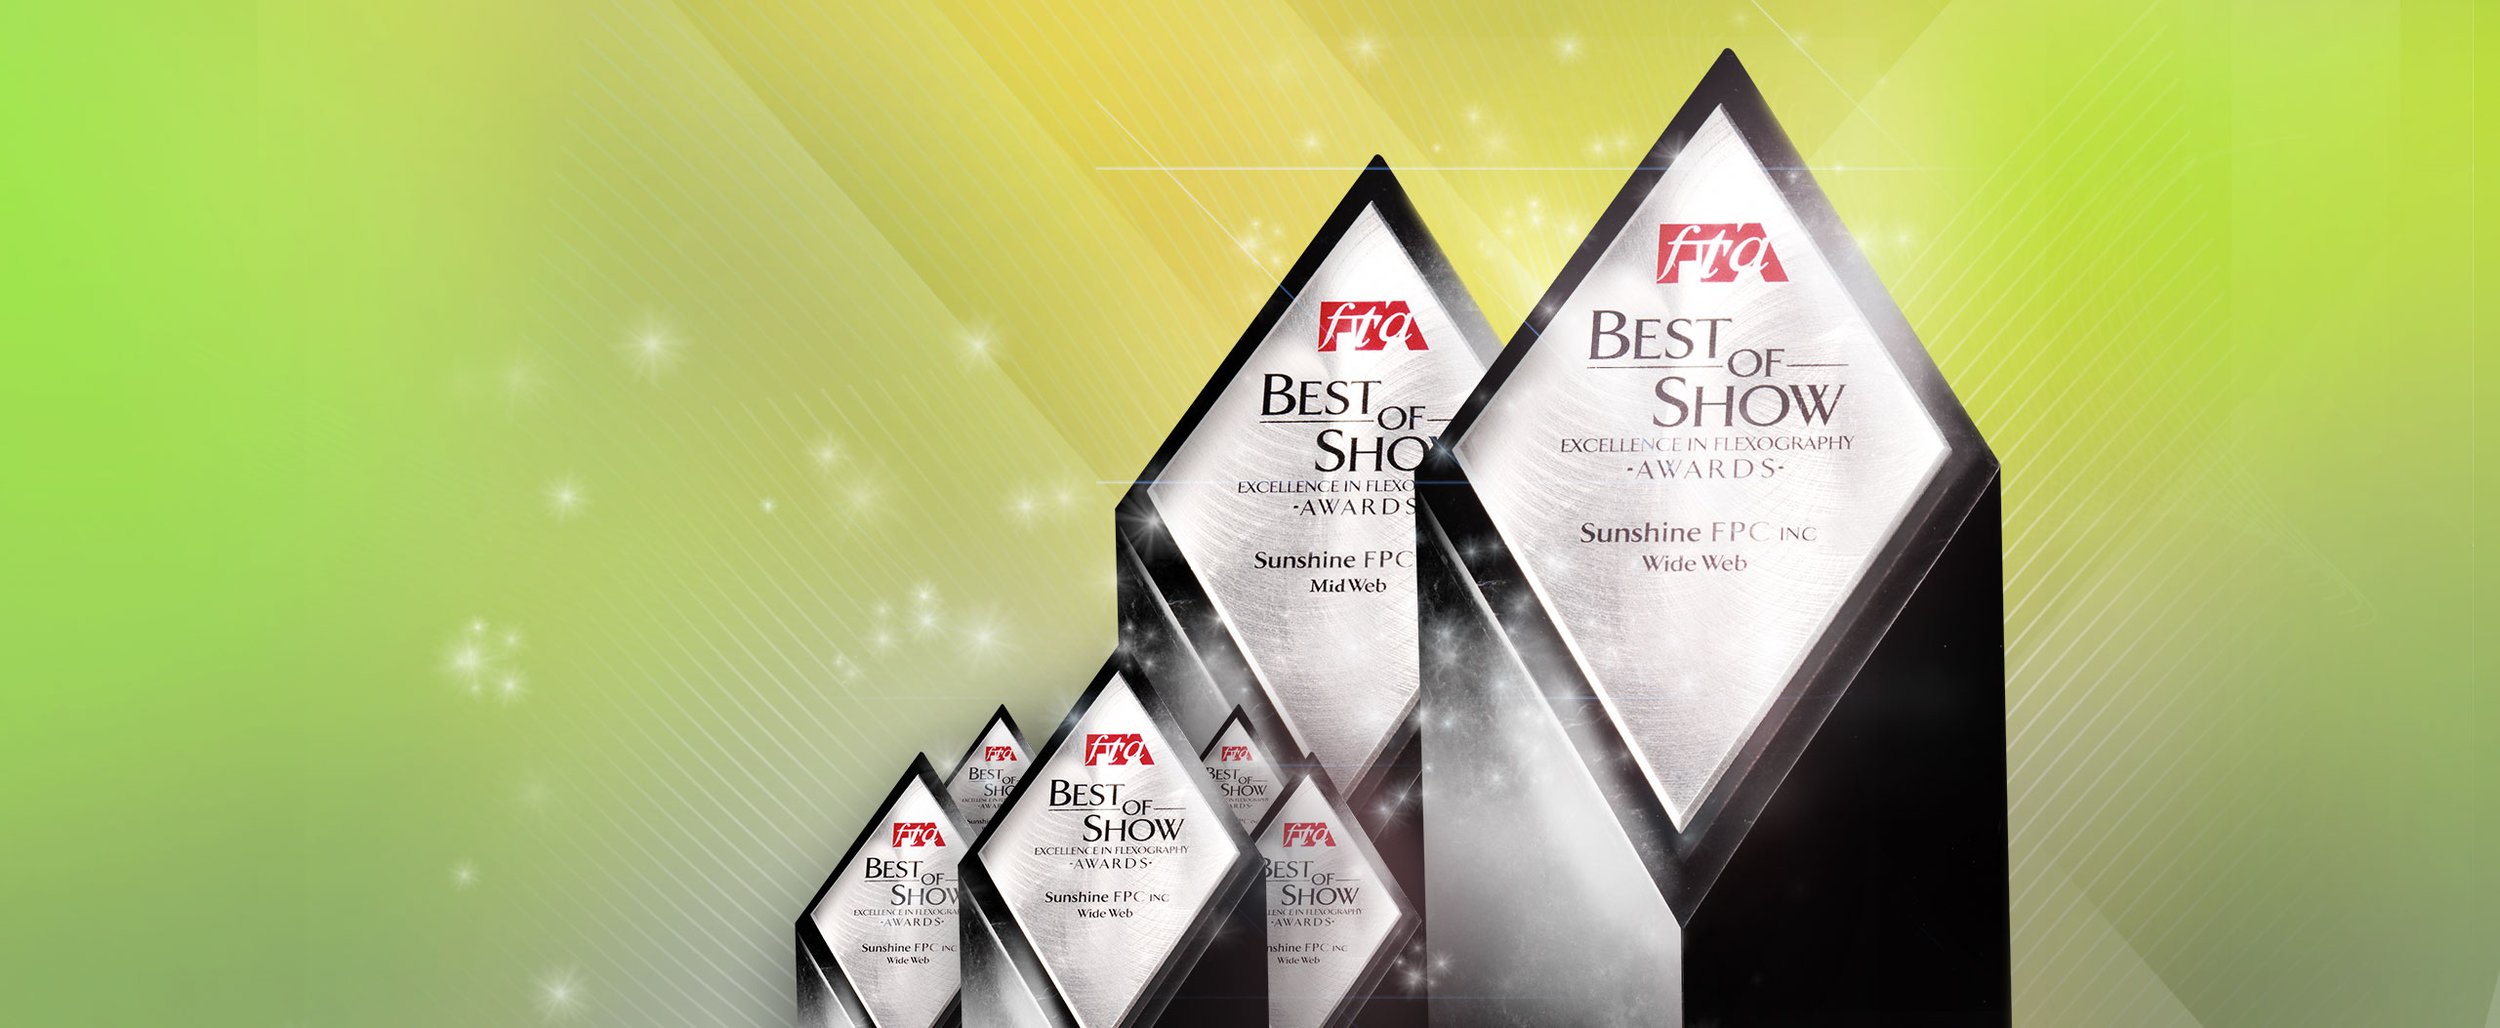 Collection of the FTA's Bets of Show Awards dedicated to Sunshine FPC